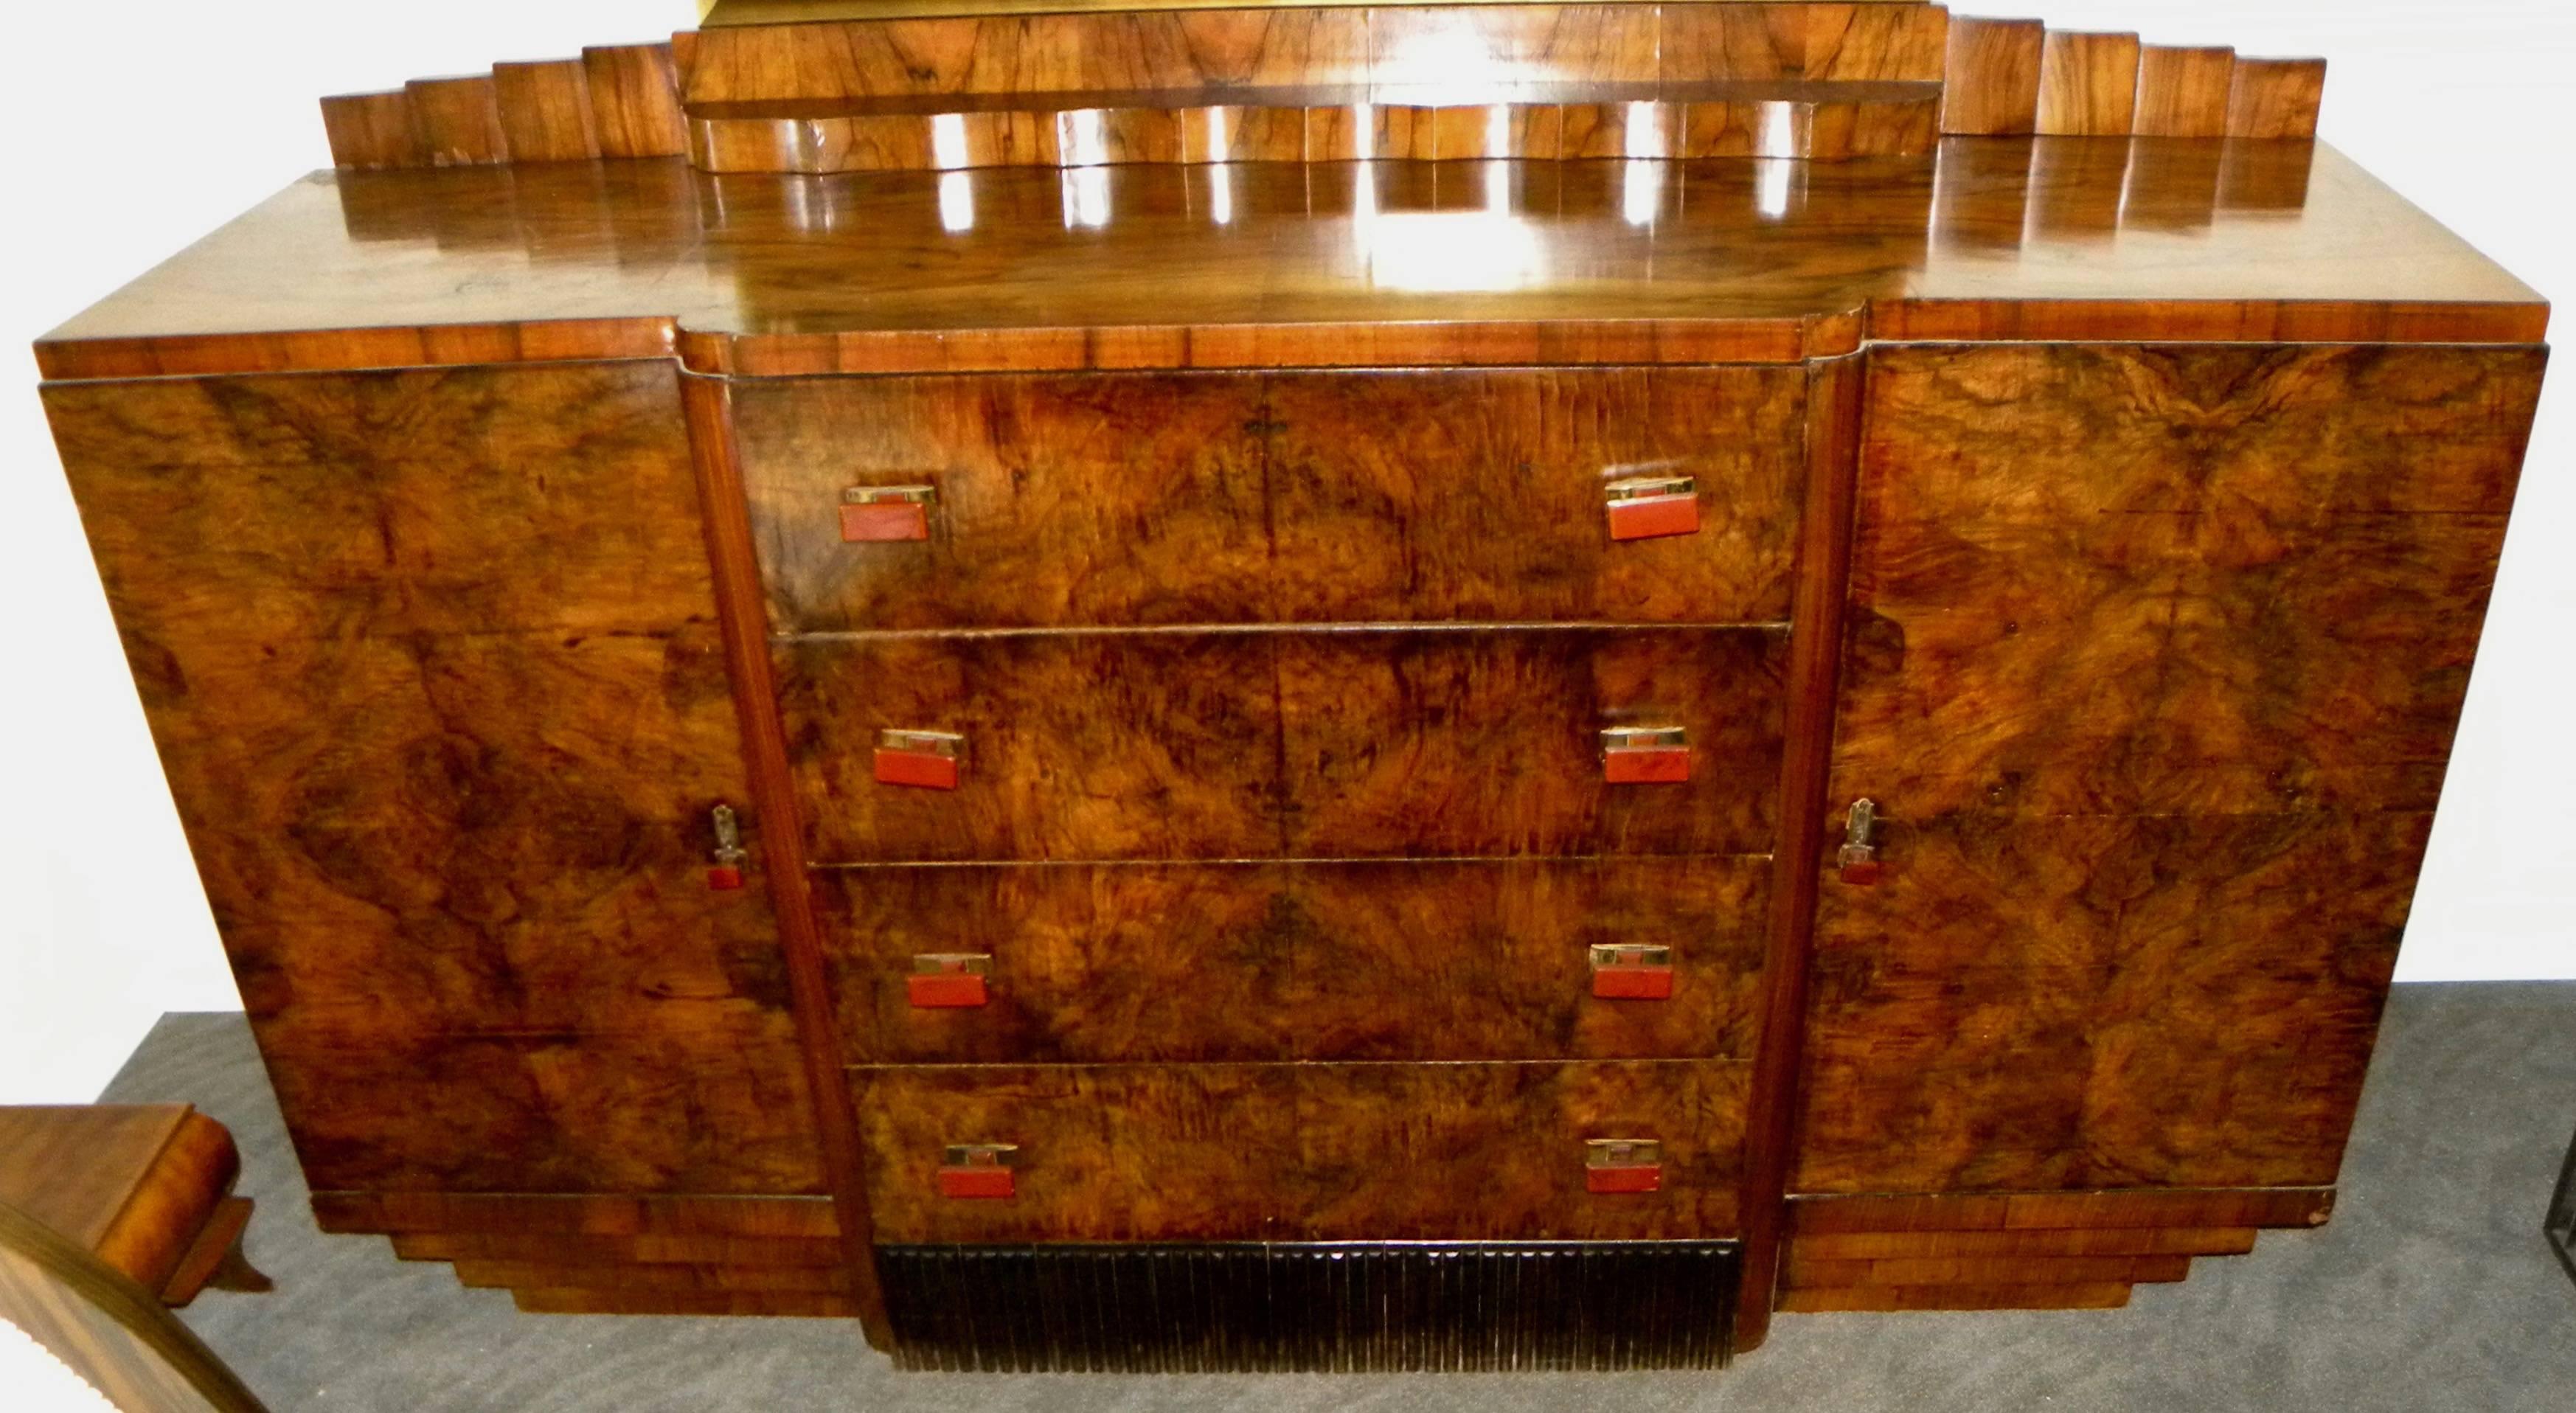 French Art Deco buffet or storage cabinet with some of the most spectacular bookmatched walnut wood veneer I’ve ever seen. This piece offers a nice and very useable size, with large storage opening on each side and four matching drawers with